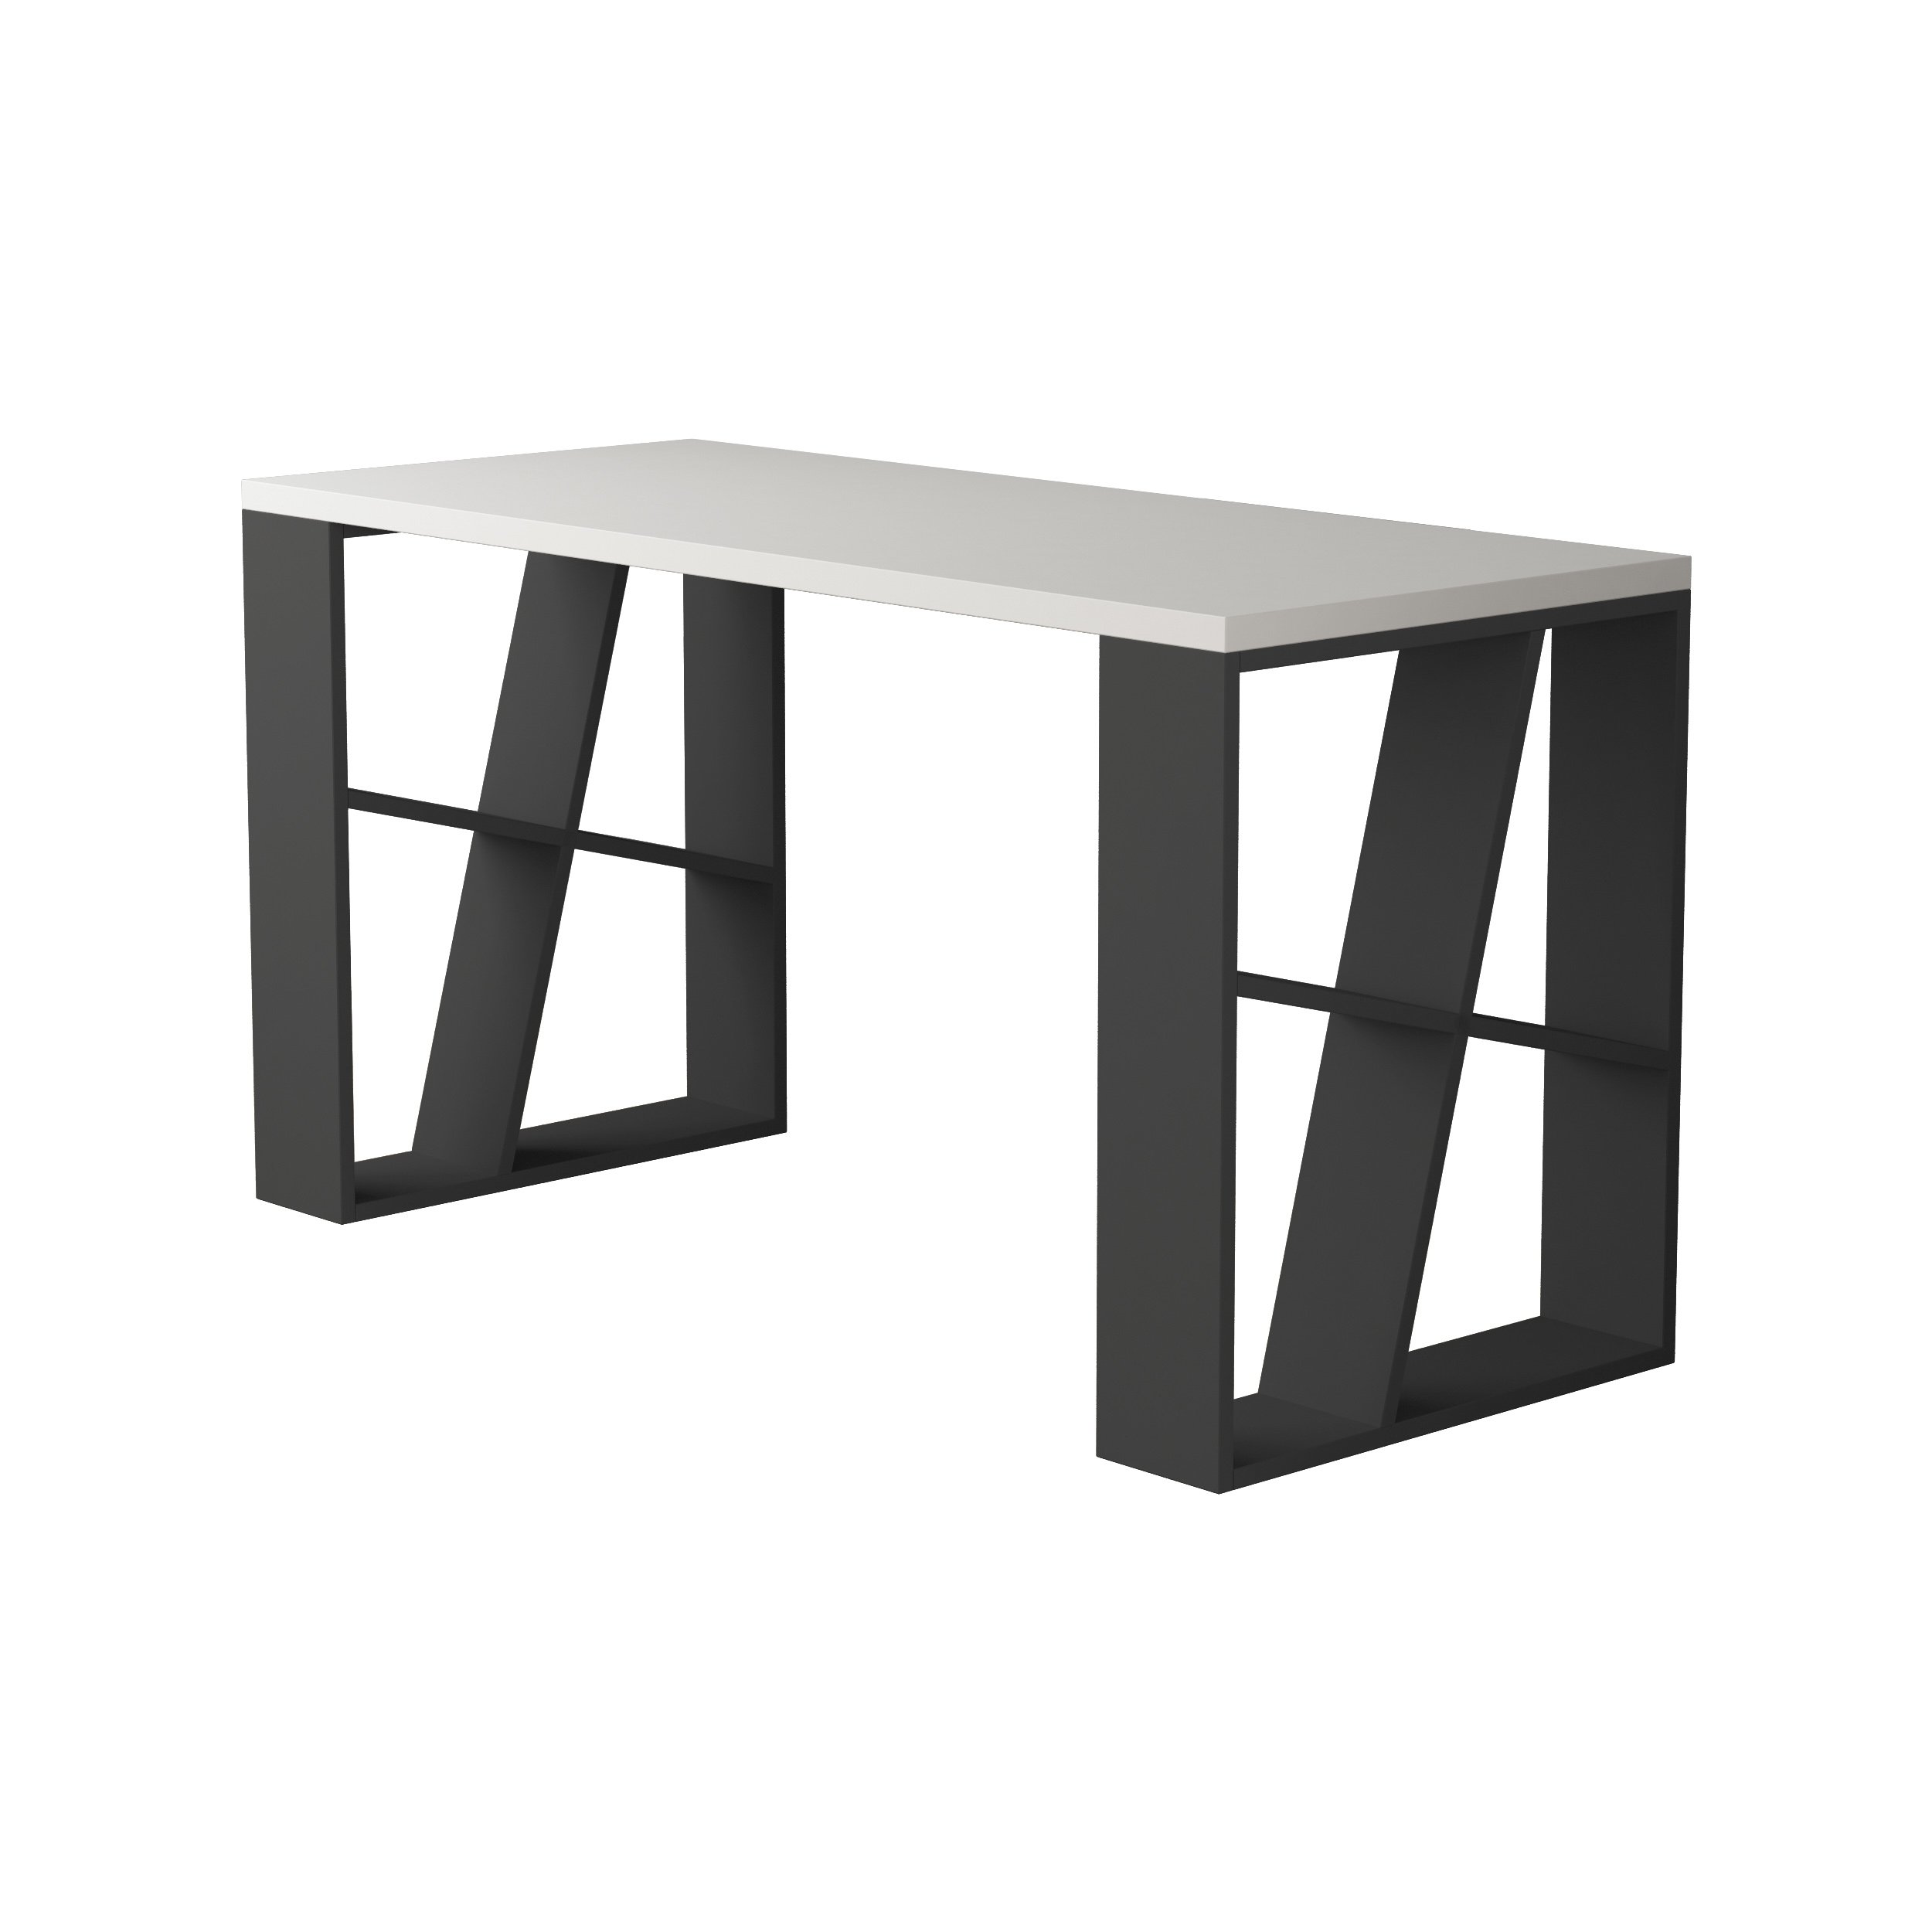 HONEY WORKING TABLE - WHITE - ANTHRACITE M.MS.10987.9